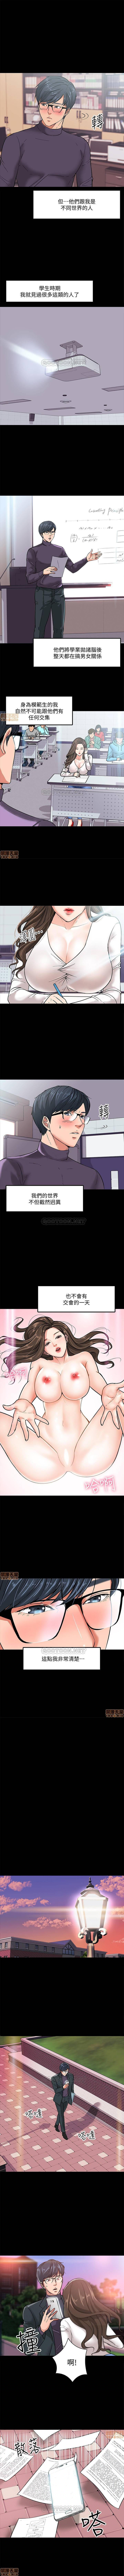 Milfporn PROFESSOR, ARE YOU JUST GOING TO LOOK AT ME? | DESIRE SWAMP | 教授，你還等什麼? Ch. 2 [Chinese] Manhwa Bath - Page 6